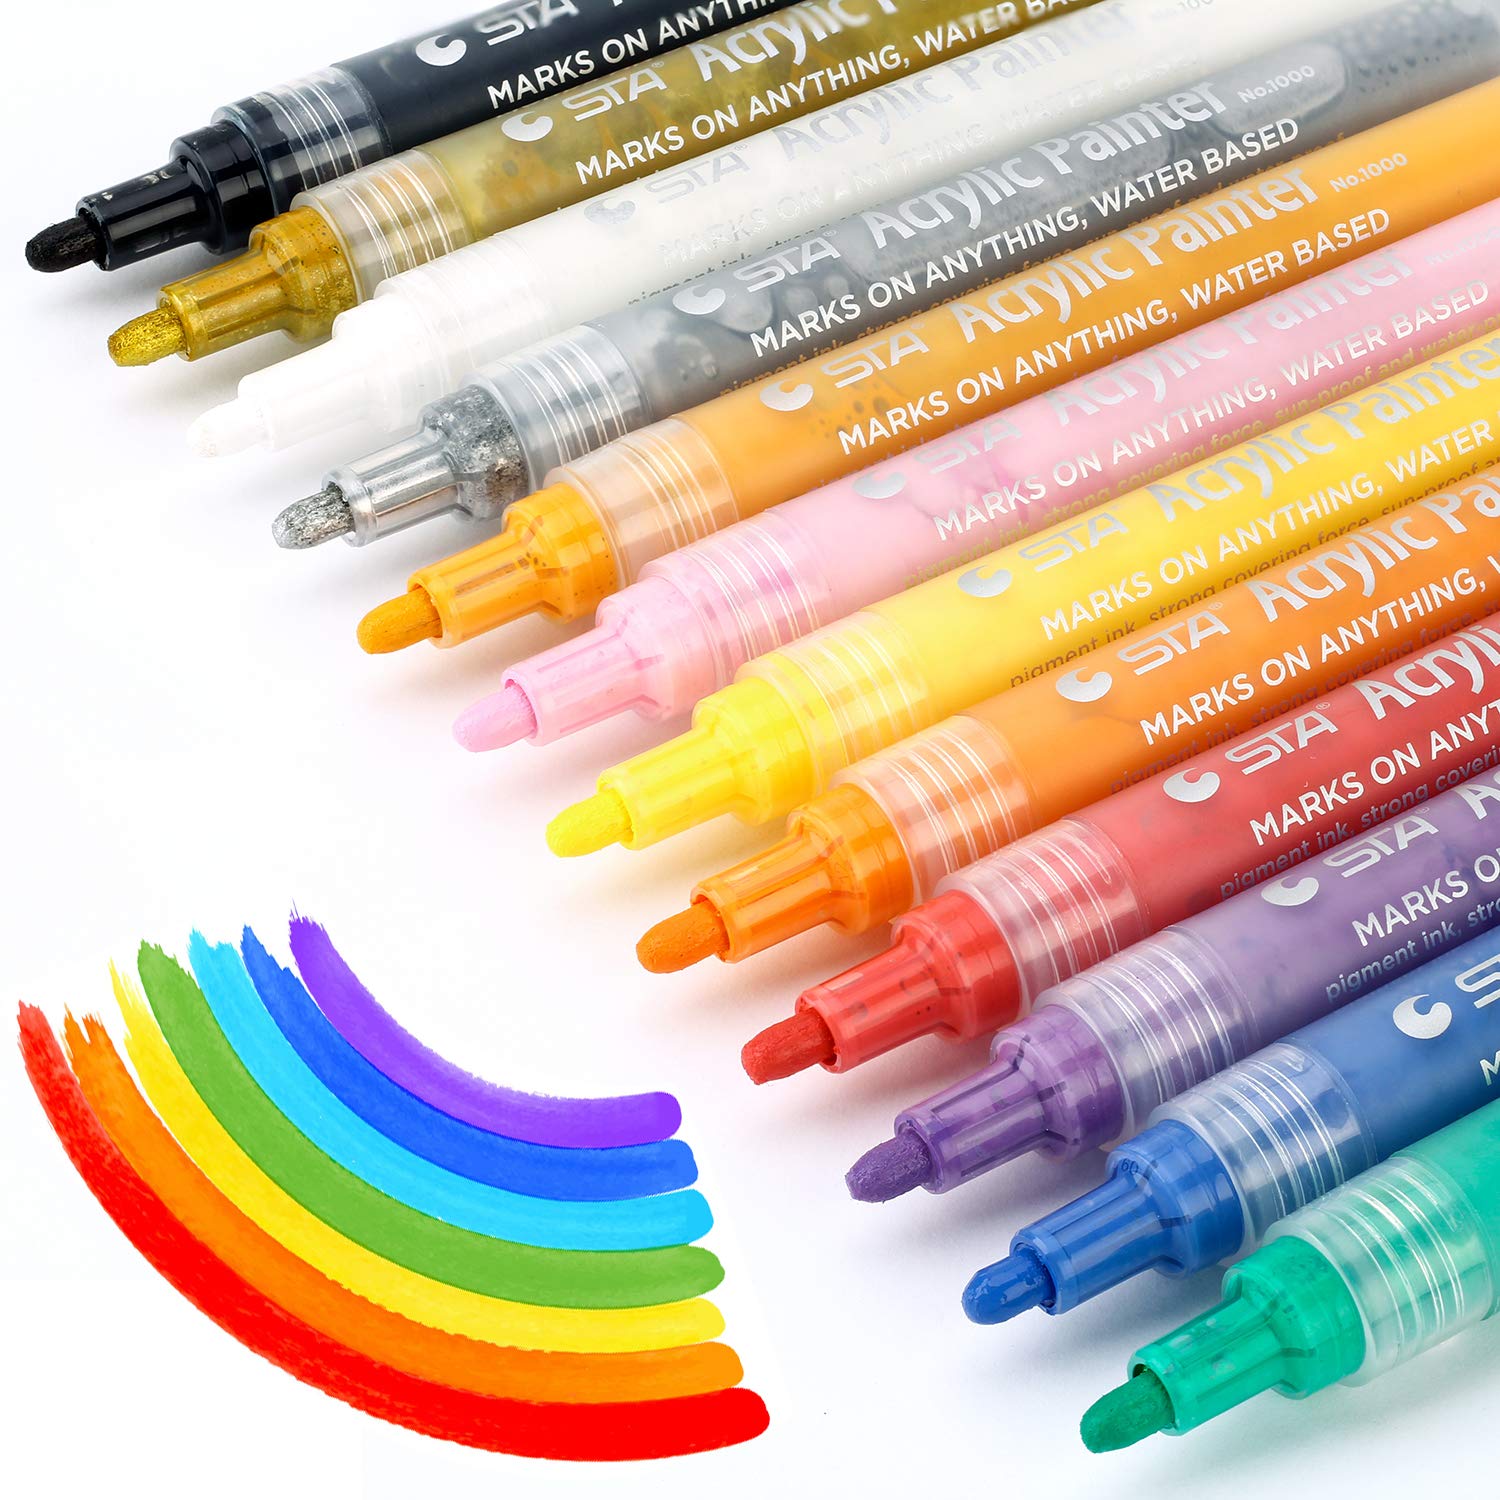 Permanent Paint Markers Set - 12 Colors - Oil-Based - High Permanence - Marker Pens for Glass, Use on Metal, Wood, Porcelain, Plastic, Pottery, Fabric